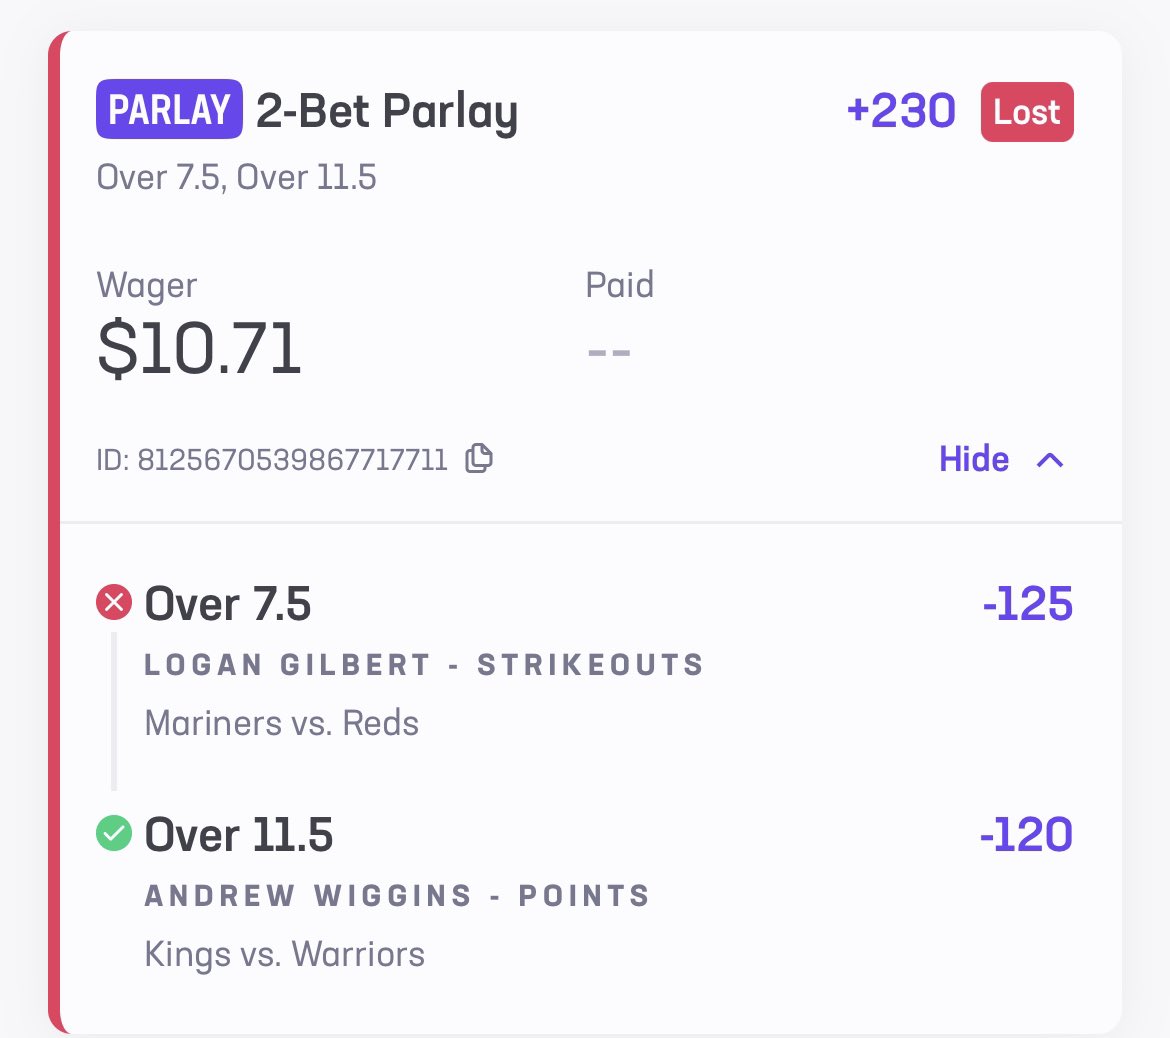 @SportsGod27 Yeah wiggins sat whole 4th  would have cashed for sure was waking up too  caught his live at 11.5 cant lie but i paired with a mlb live play 😭 and i didnt know logan gilbert kd the side and did not much after that i fell fot it